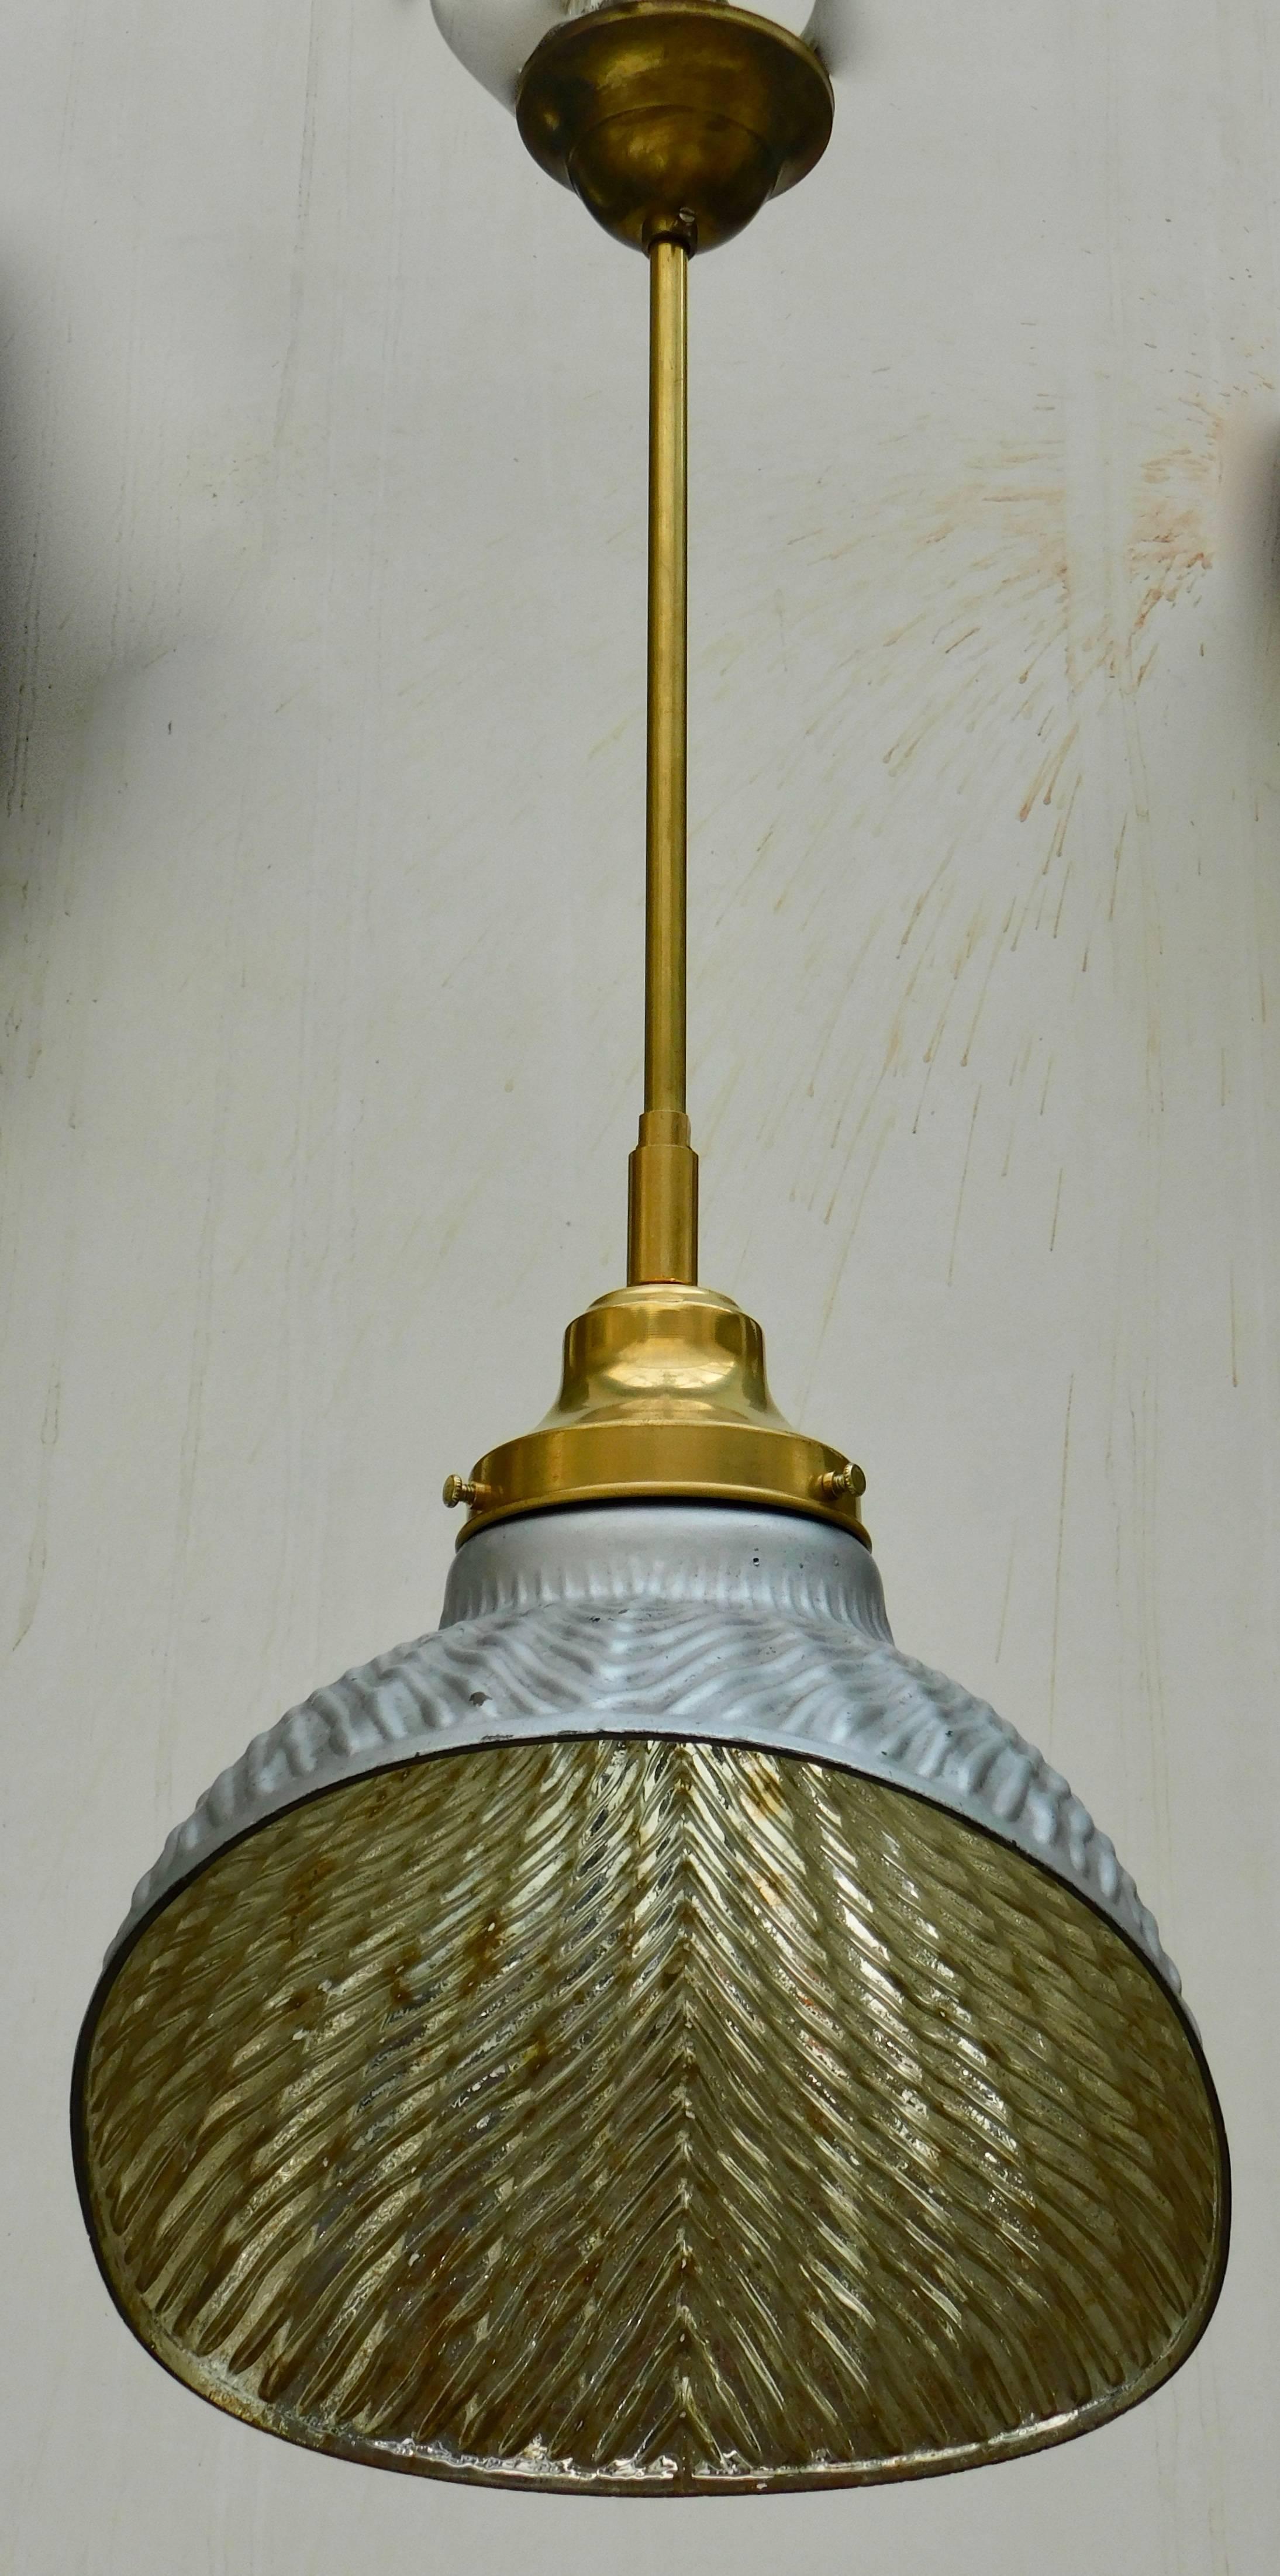 Mercury glass hanging lampshade made by Helioray in the first part of the 20th century for use to reflect and brighten overhead light for surgery and examinations.
The exterior retains the original grey paint and the Helioray label.
Renewed and